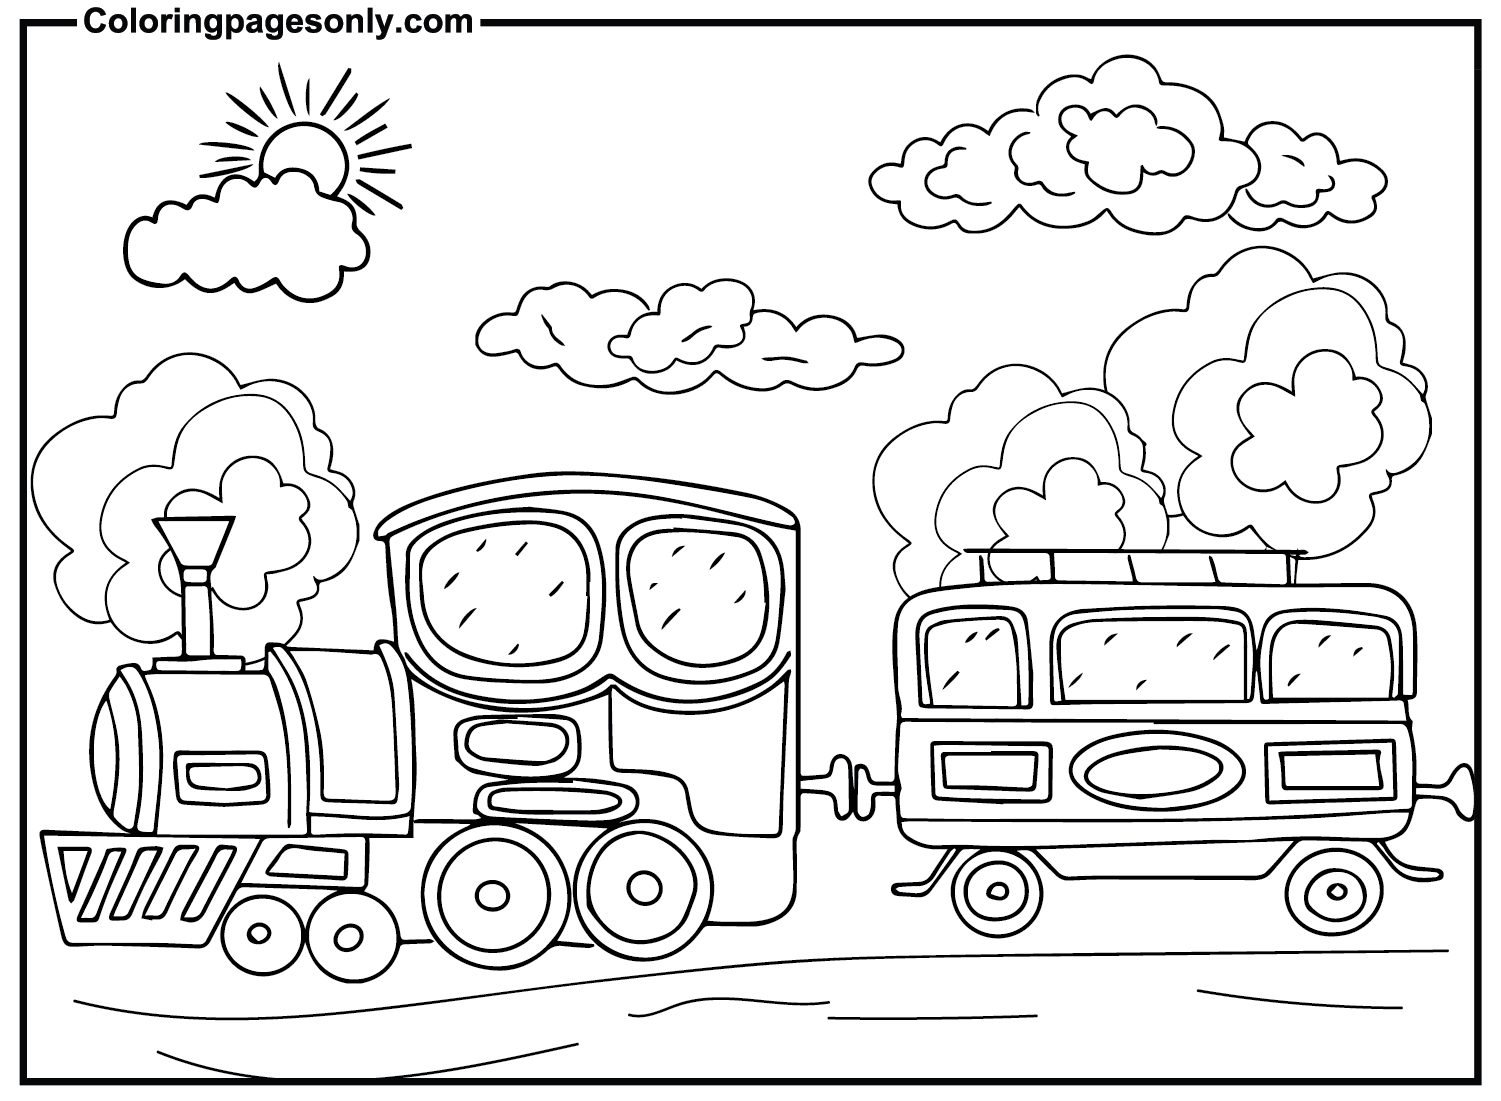 Train Images Coloring Pages